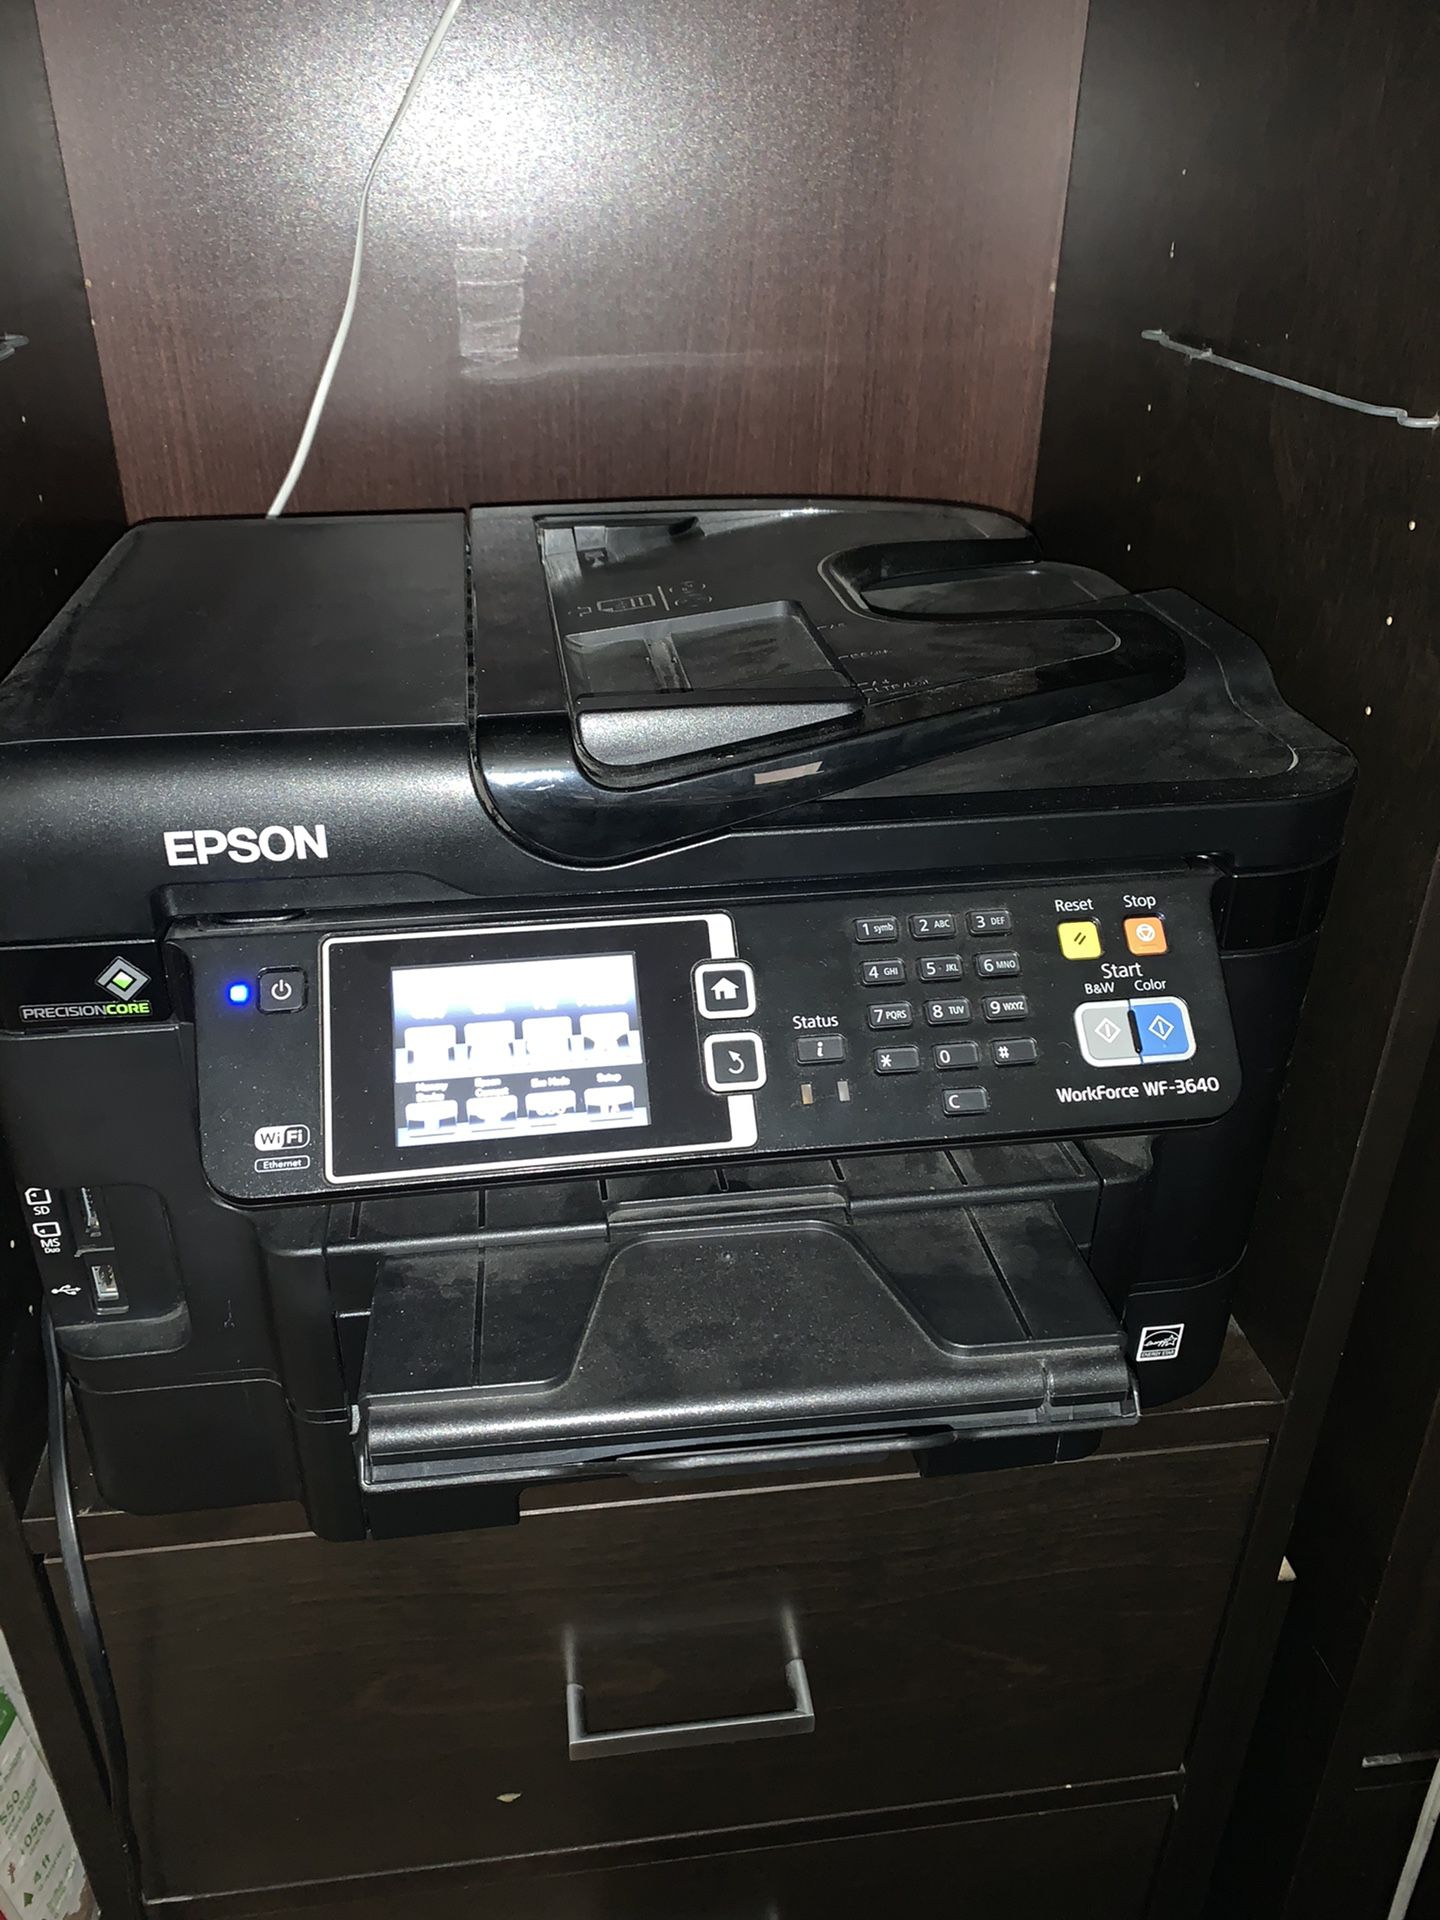 Epson All In One Printer Fax Scan Copy Wf 3640 For Sale In North Attleborough Ma Offerup 2722